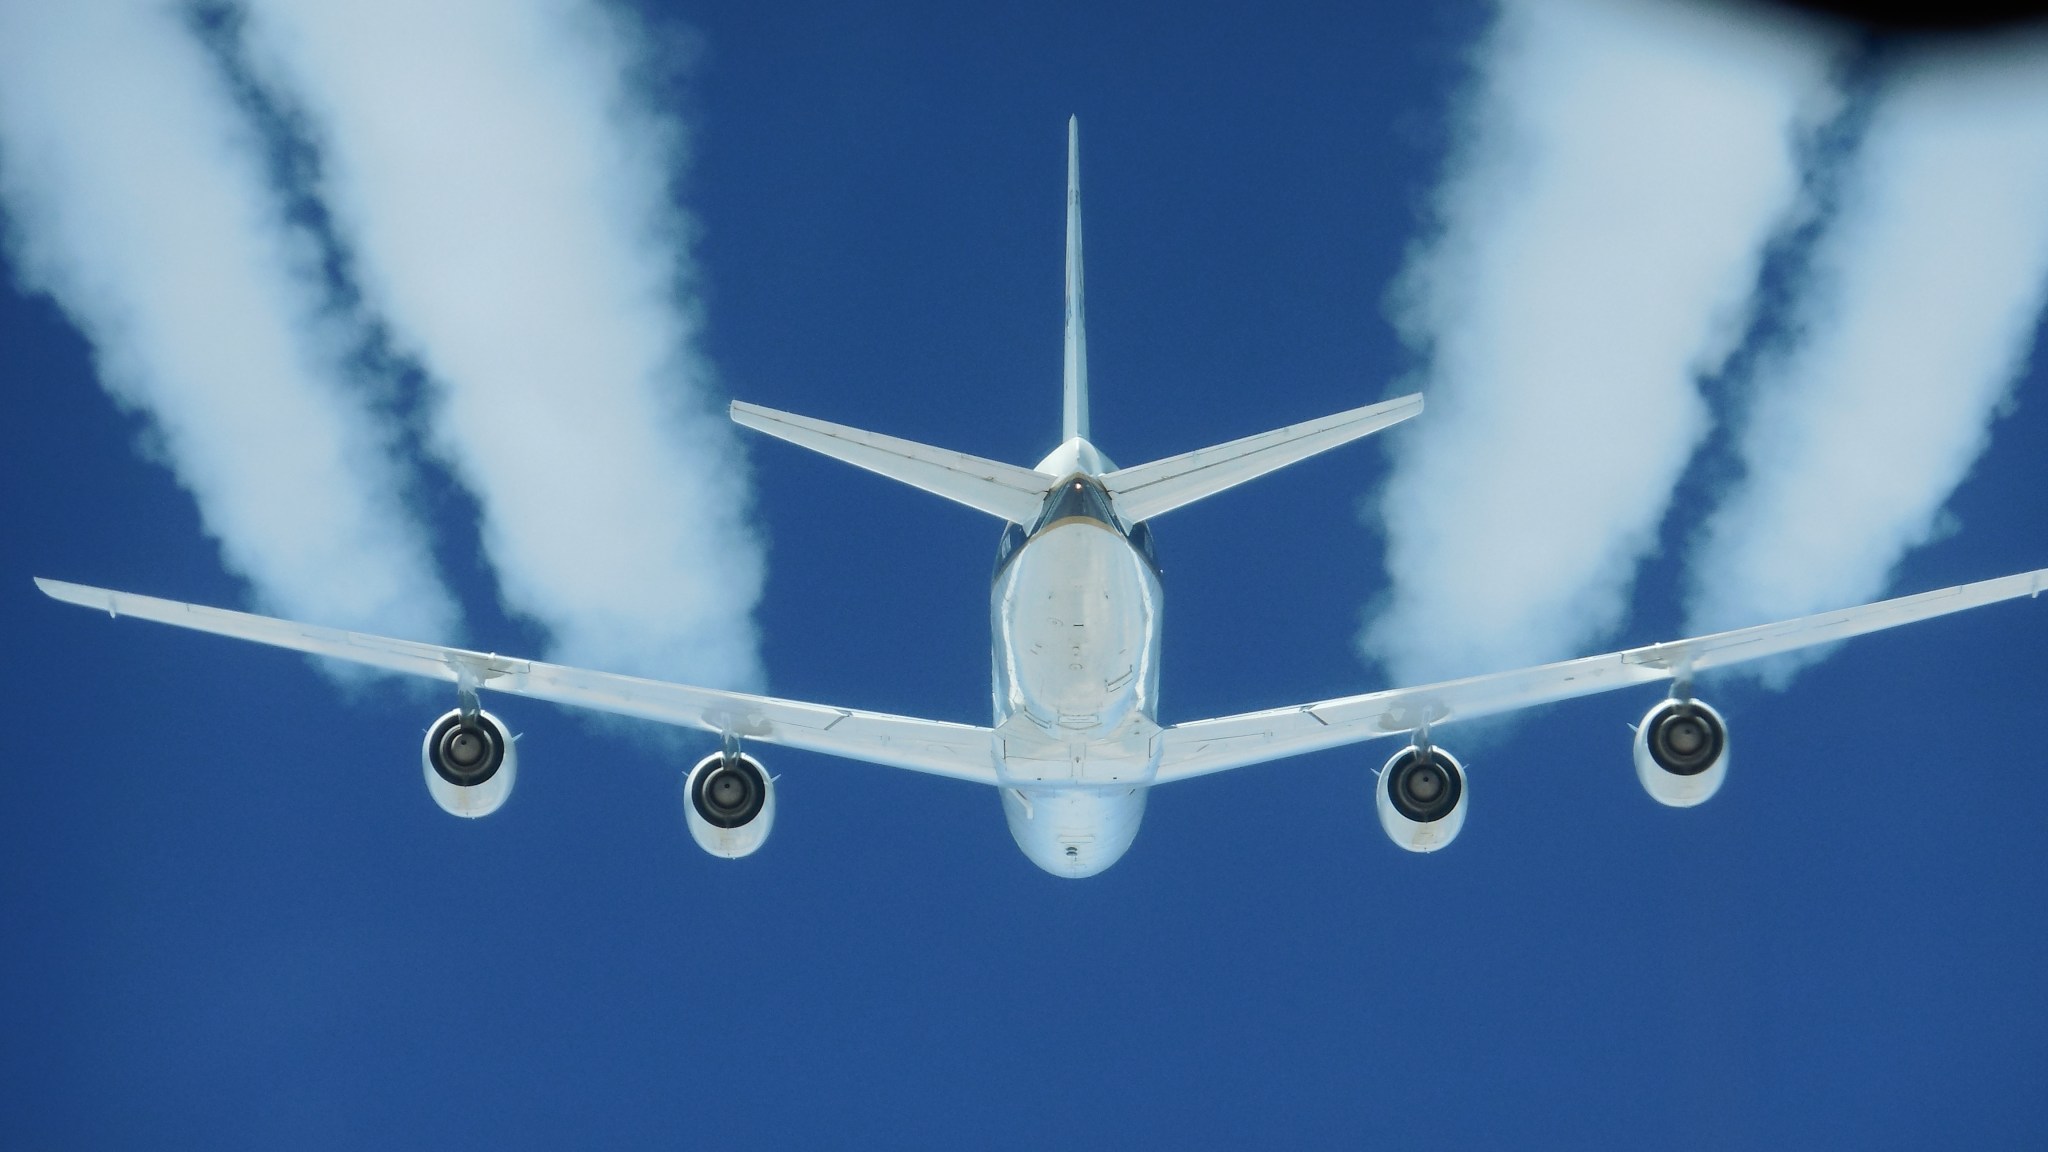 Alternative Fuel Effects on Contrails and Cruise Emissions (ACCESS II) flight test in a DC-8 aircraft.